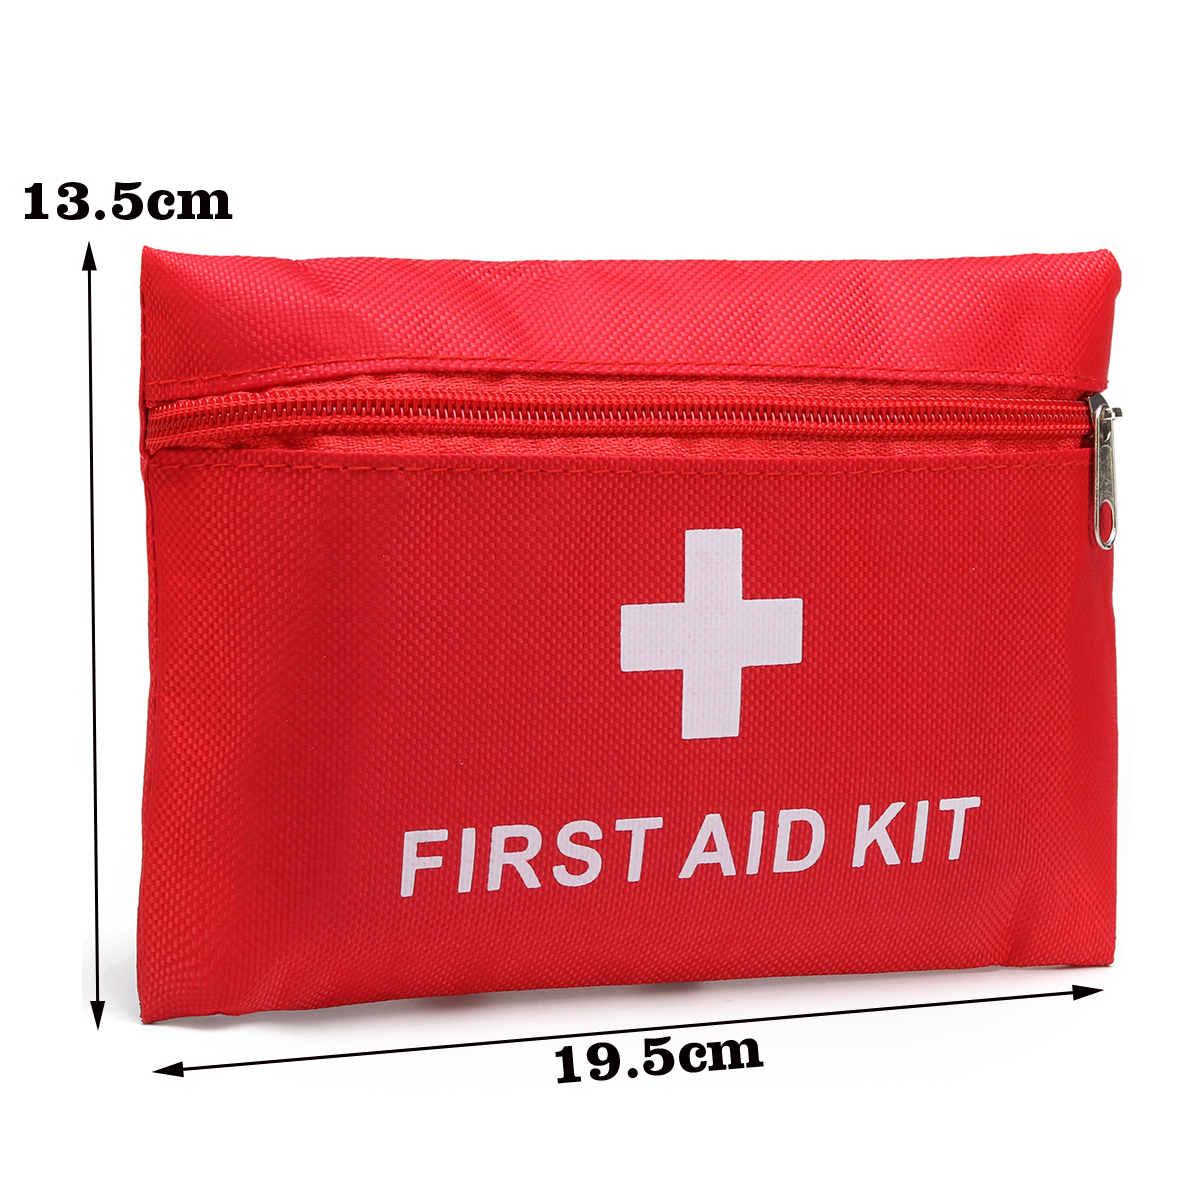 Emergency-First-Aid-Kit-79-Piece-Survival-Supplies-Bag-for-Car-Travel-Home-Emergency-Box-1420491-4